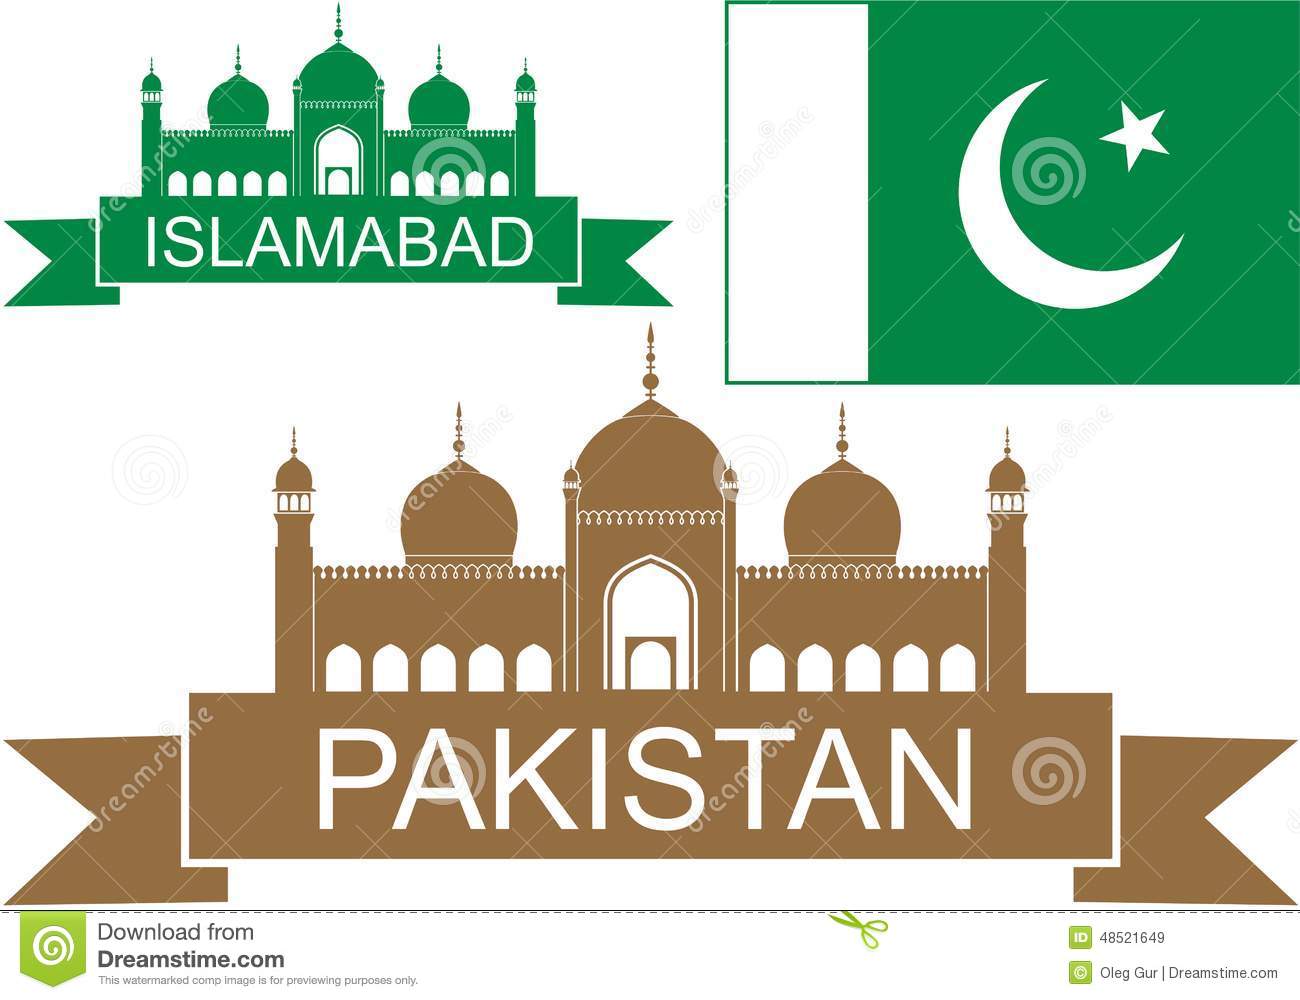 Pakistan clipart #16, Download drawings